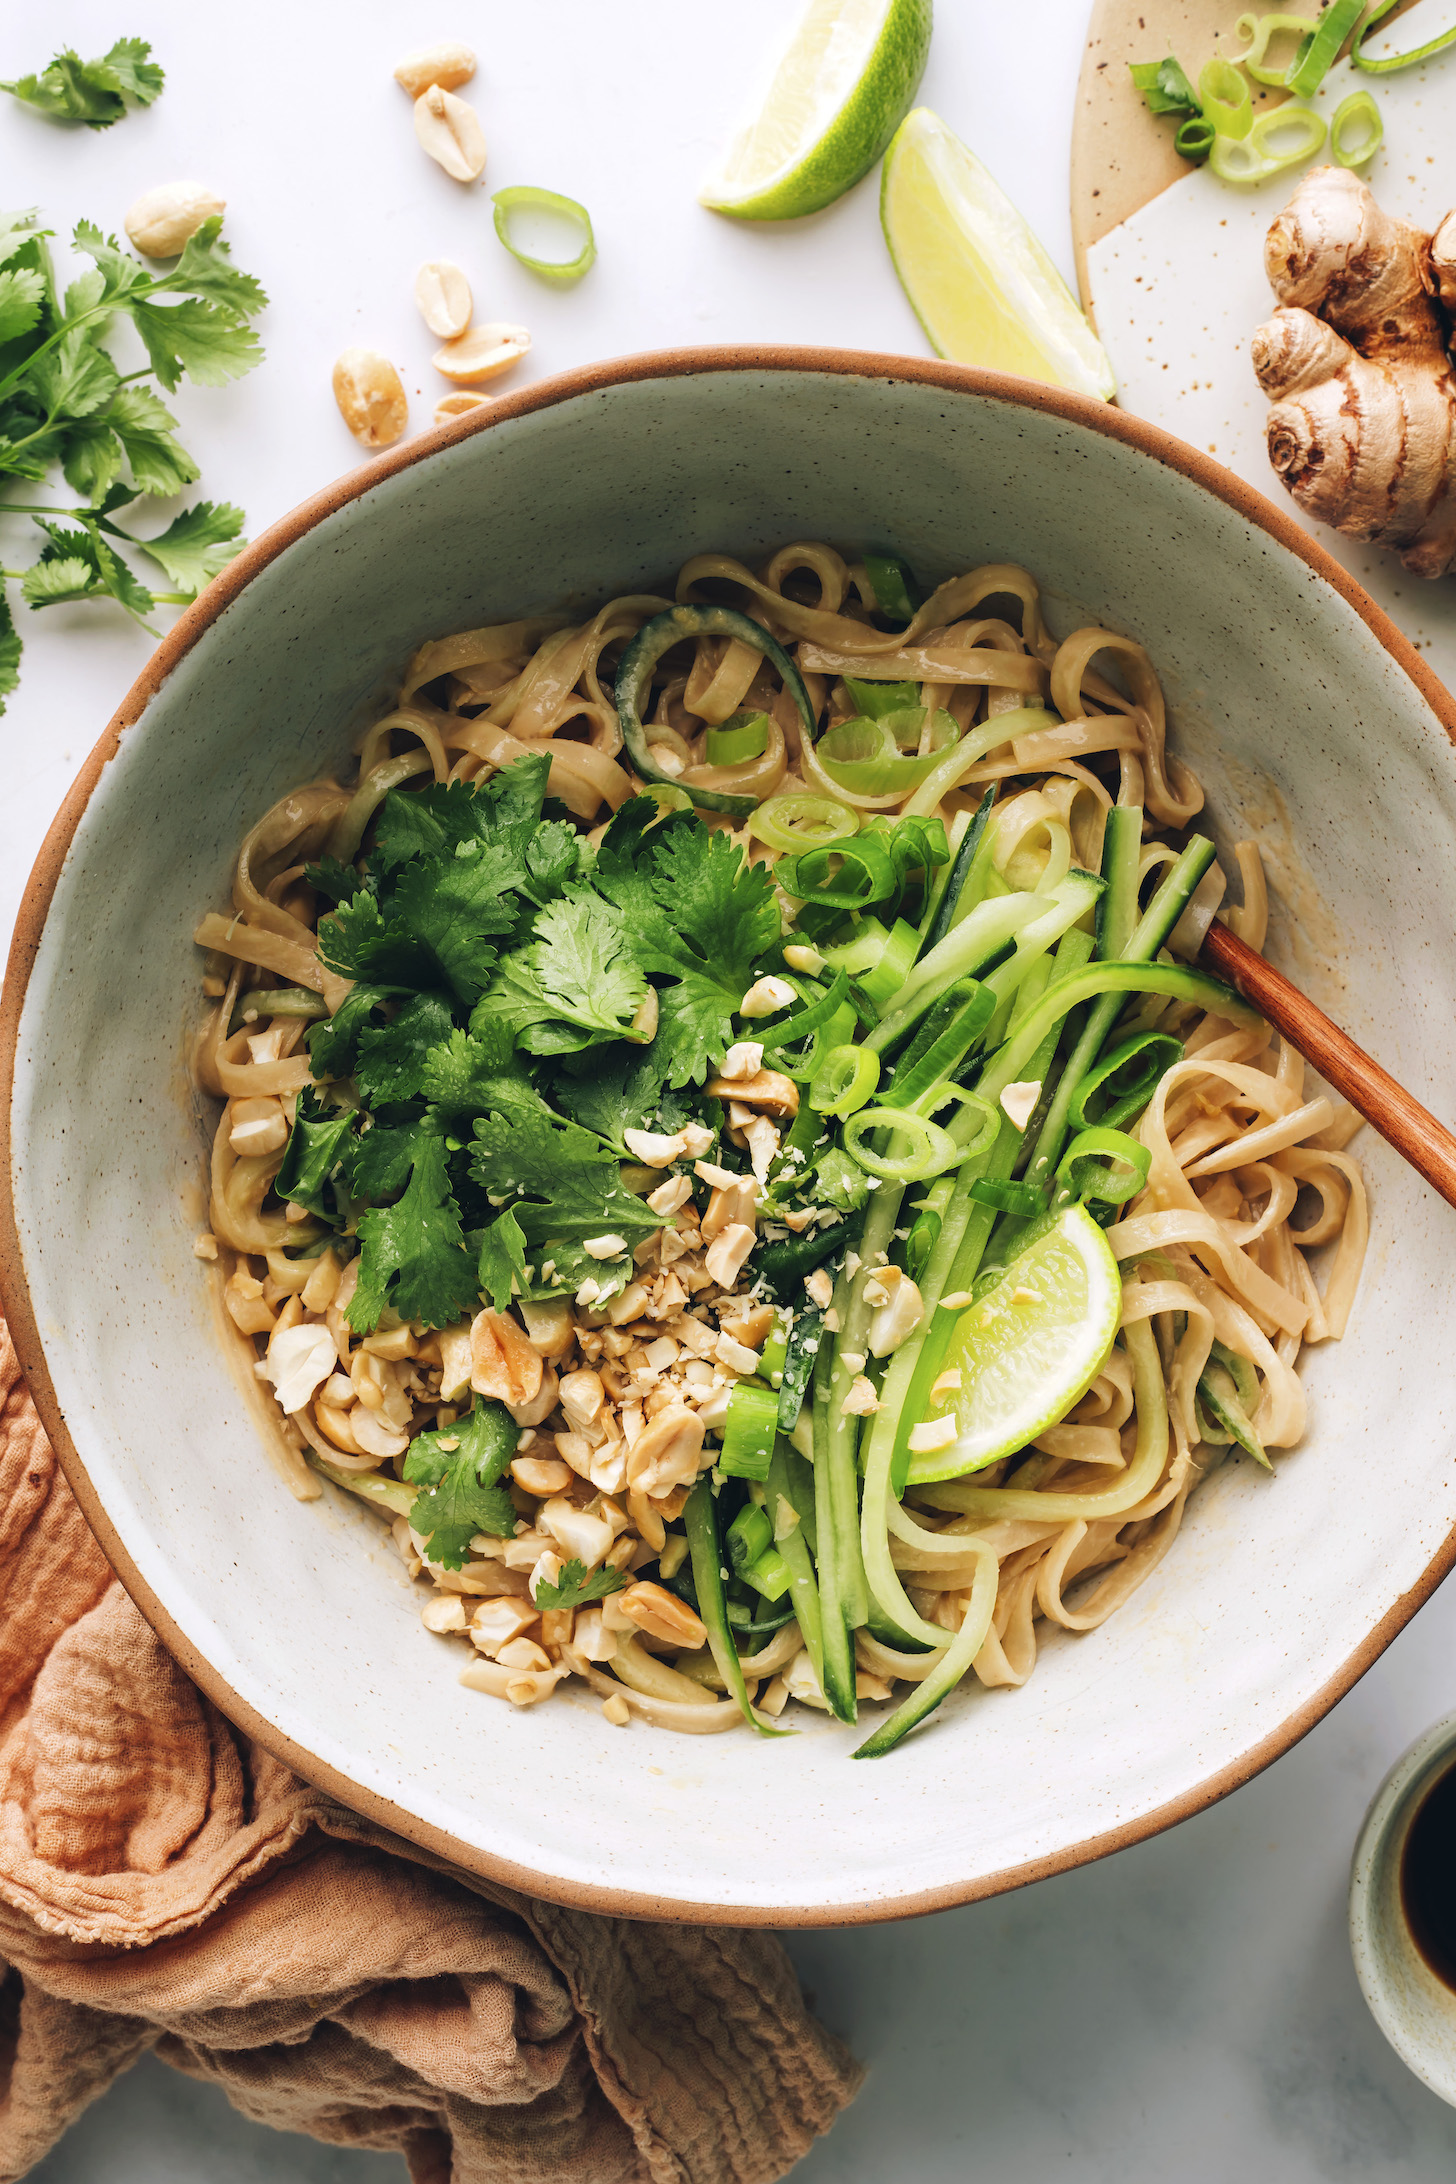 Cucumbers, lime, peanuts, and cilantro over a bowl of saucy noodles